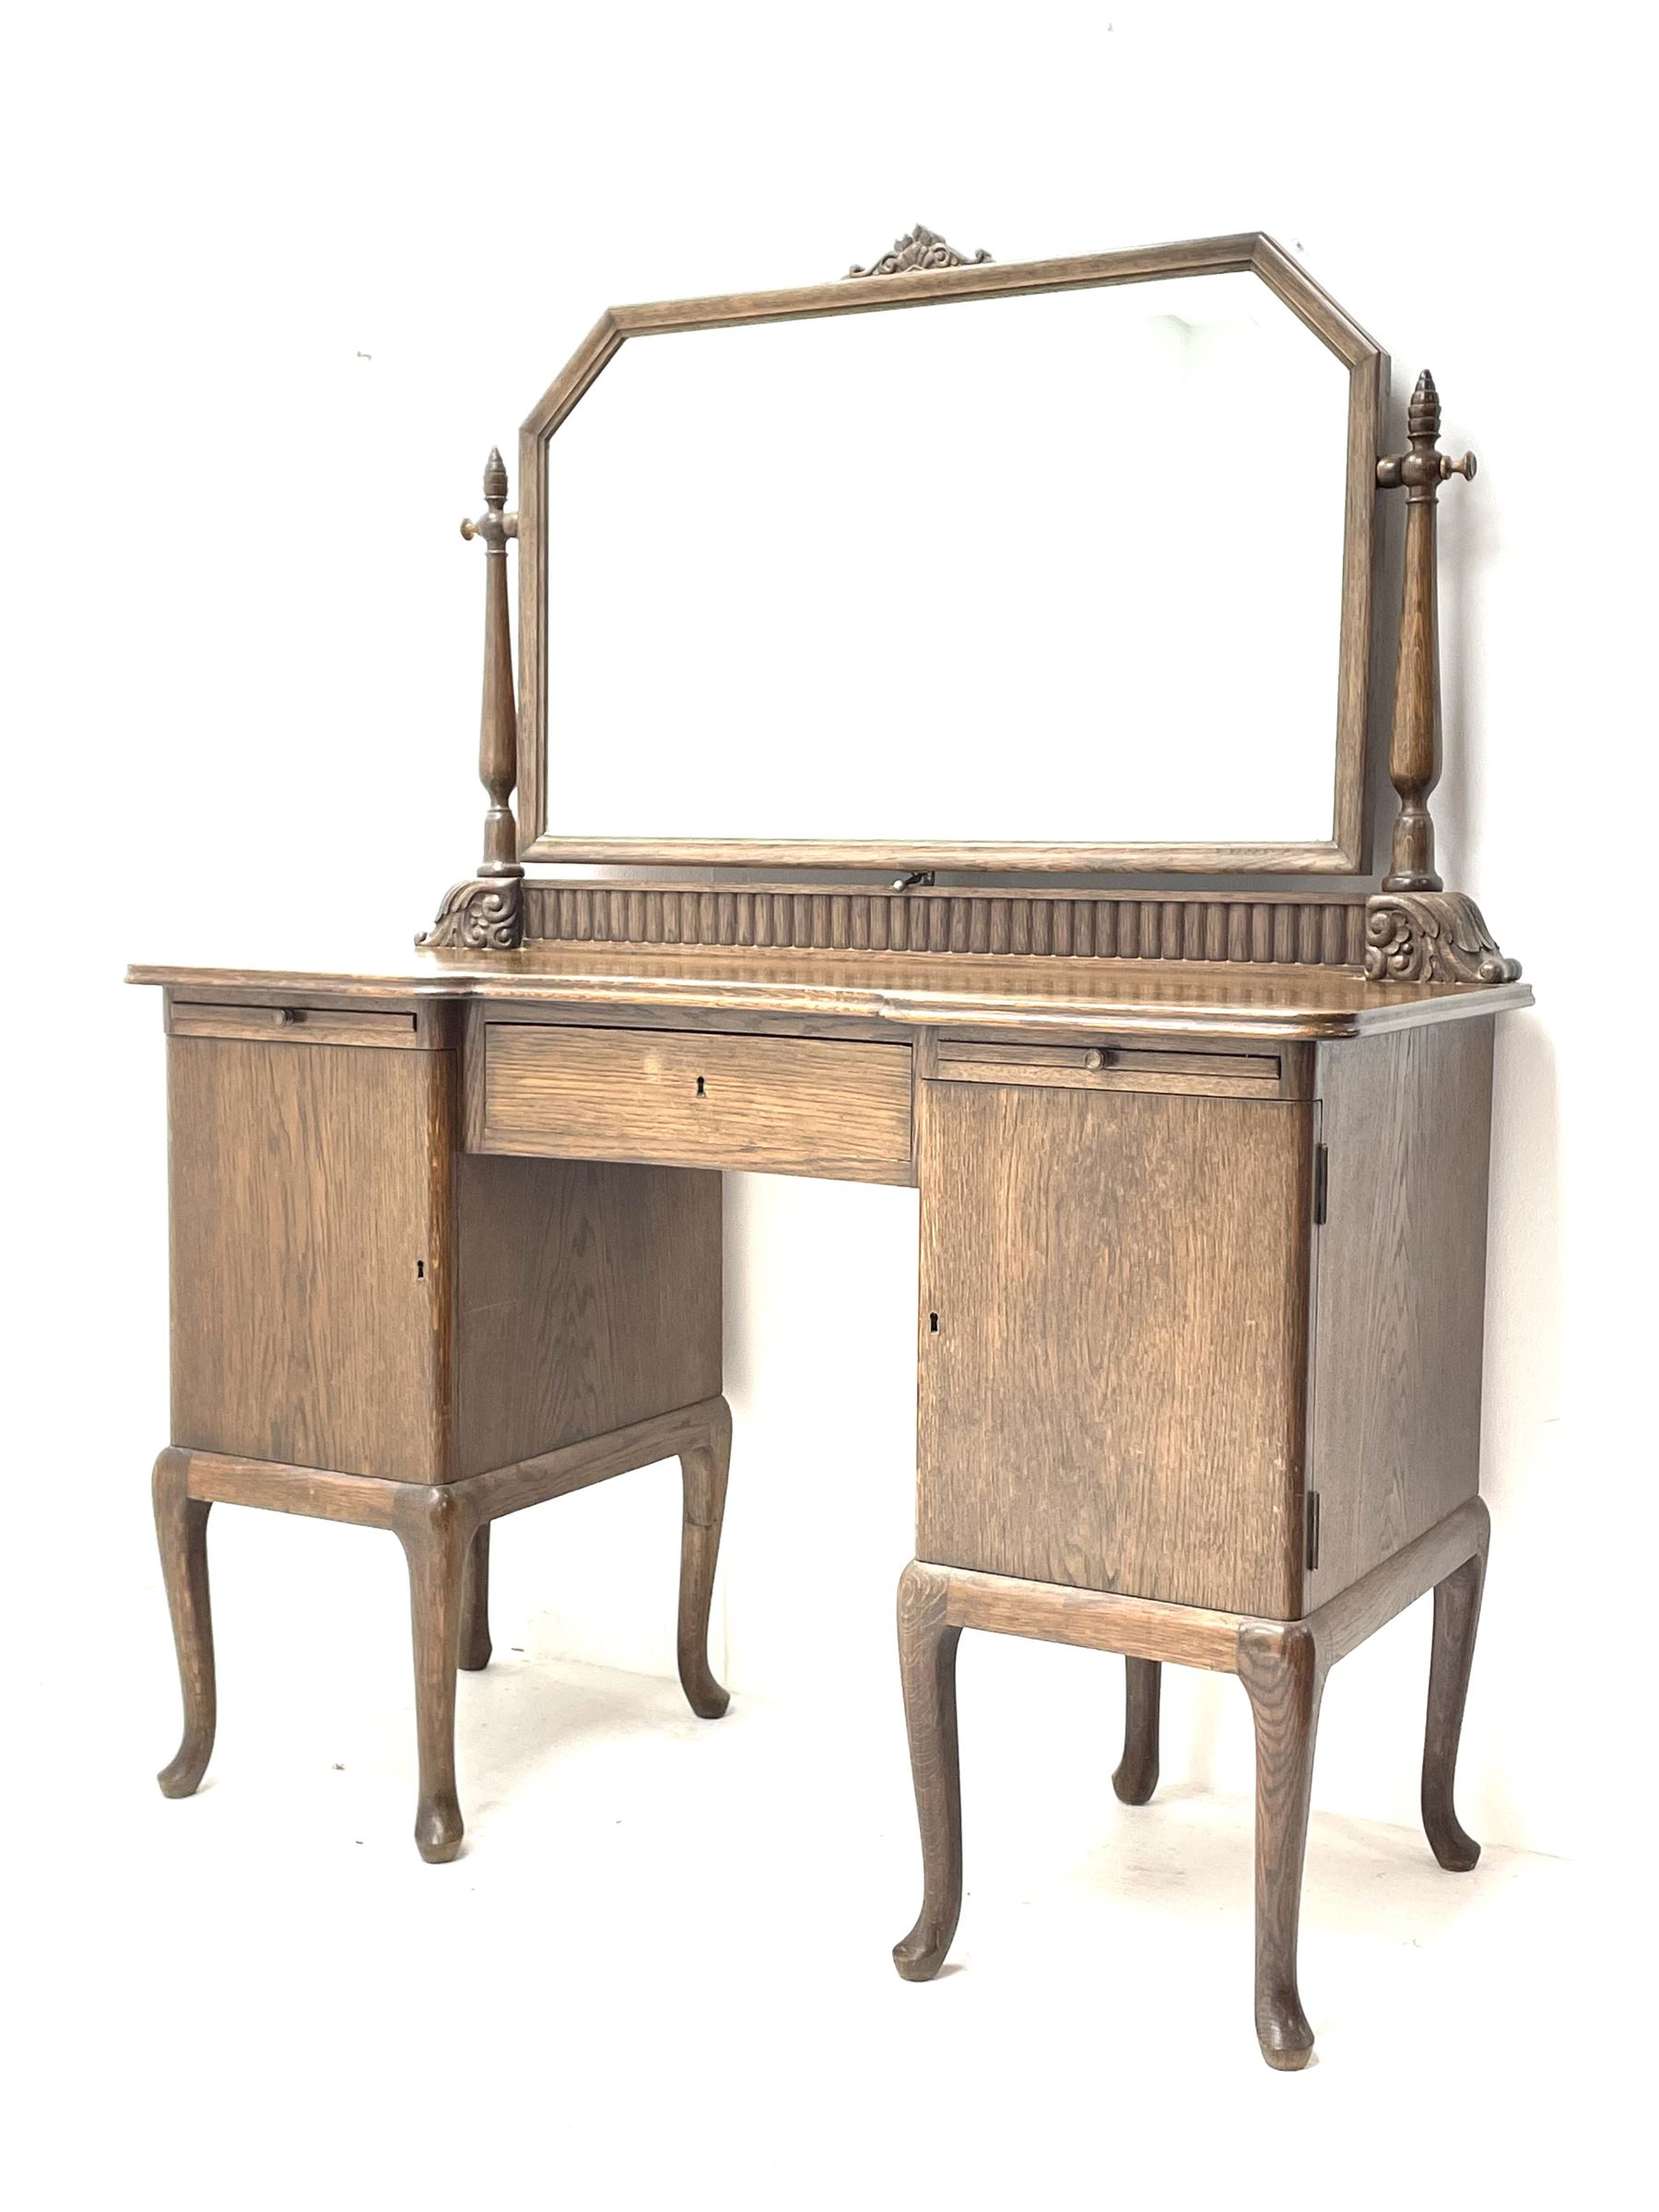 Early 20th century vintage oak dressing table